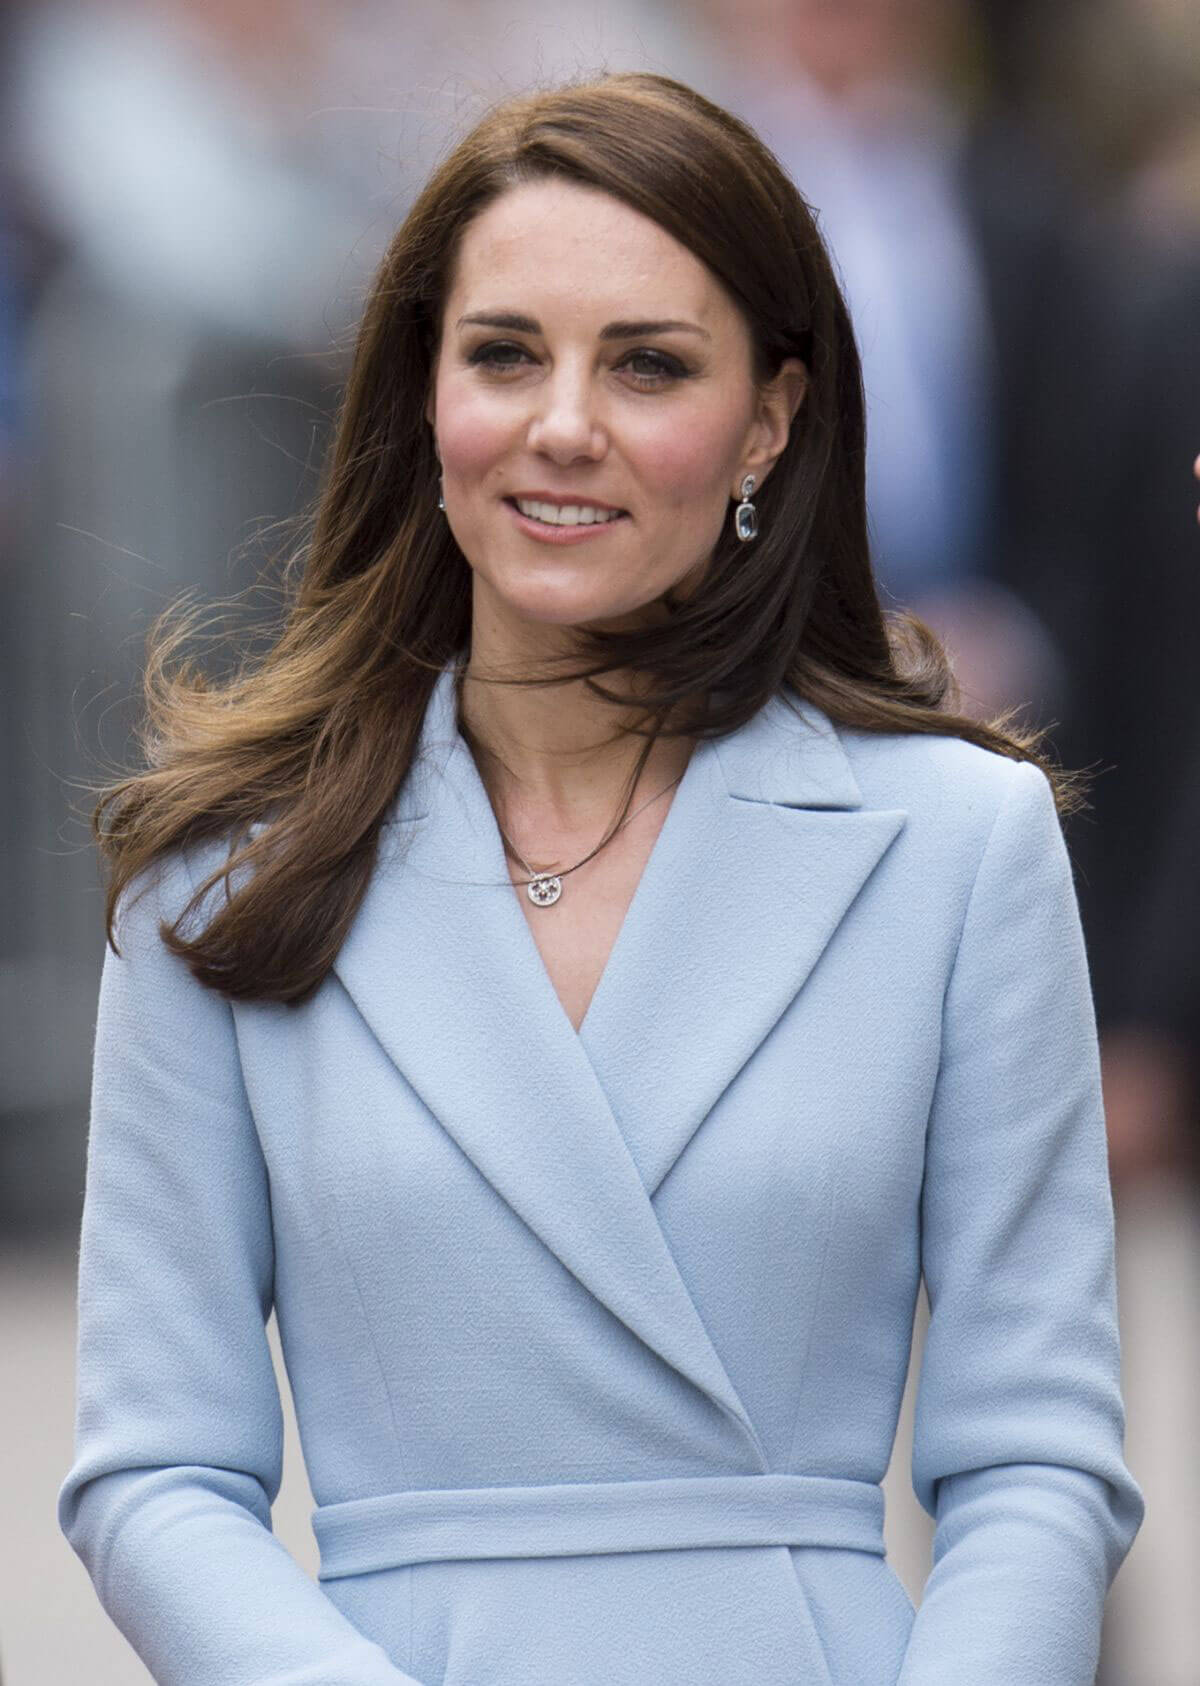 Kate Middleton Arrives at Mus??e D'Art Moderne Drand-Duc Jean in Luxembourg